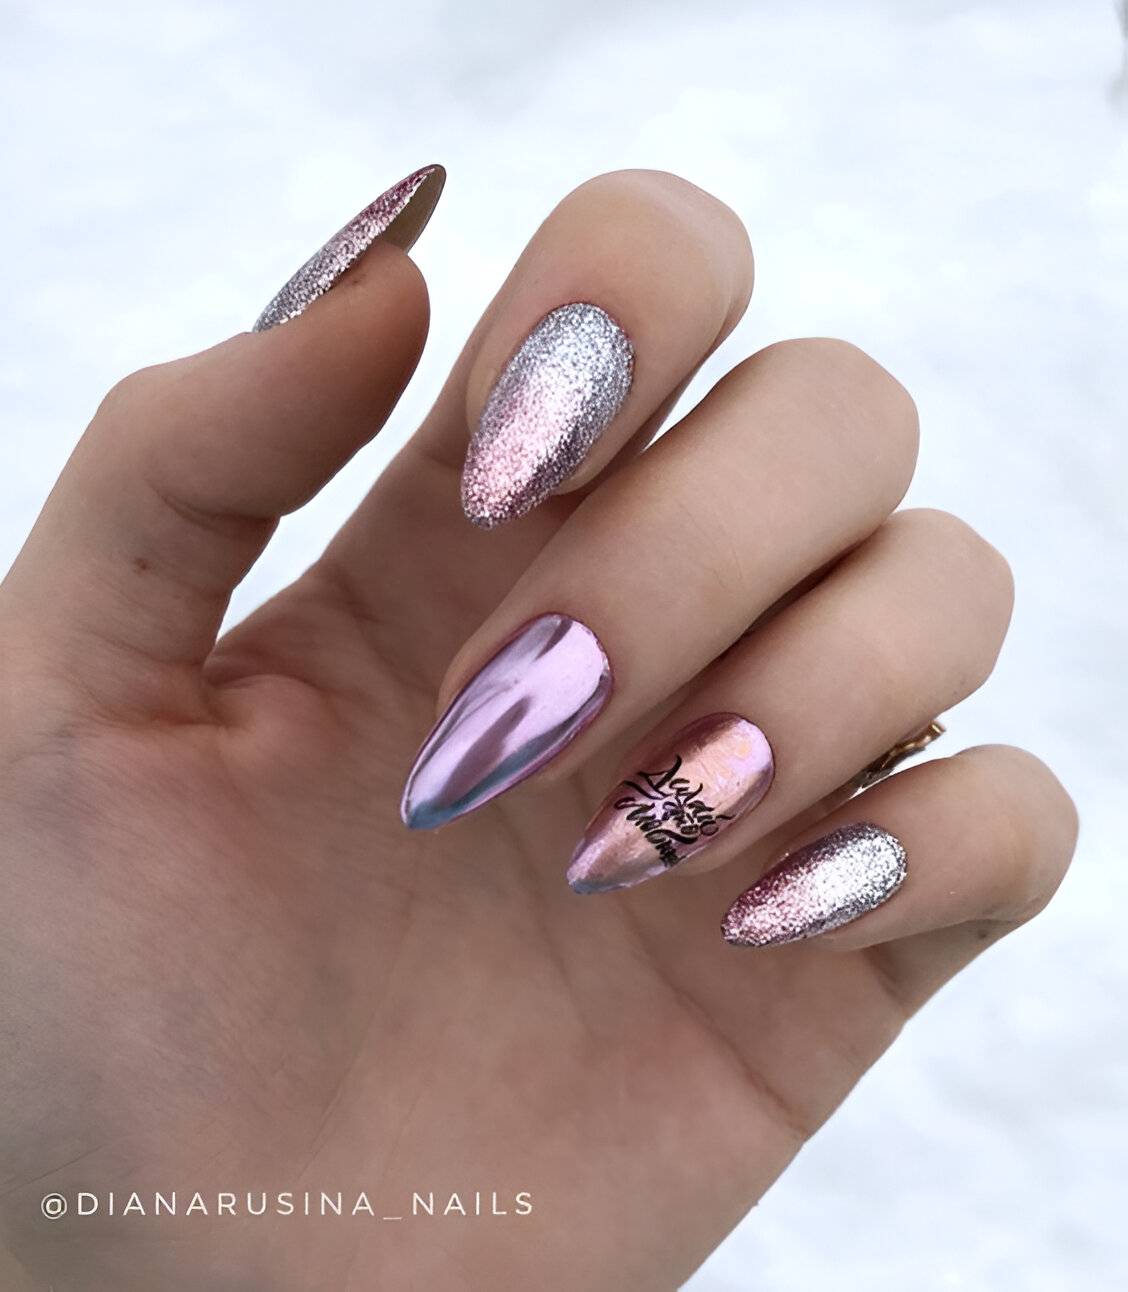 30 Chic Chrome Nail Designs For The Ultimate Glam Look - 211